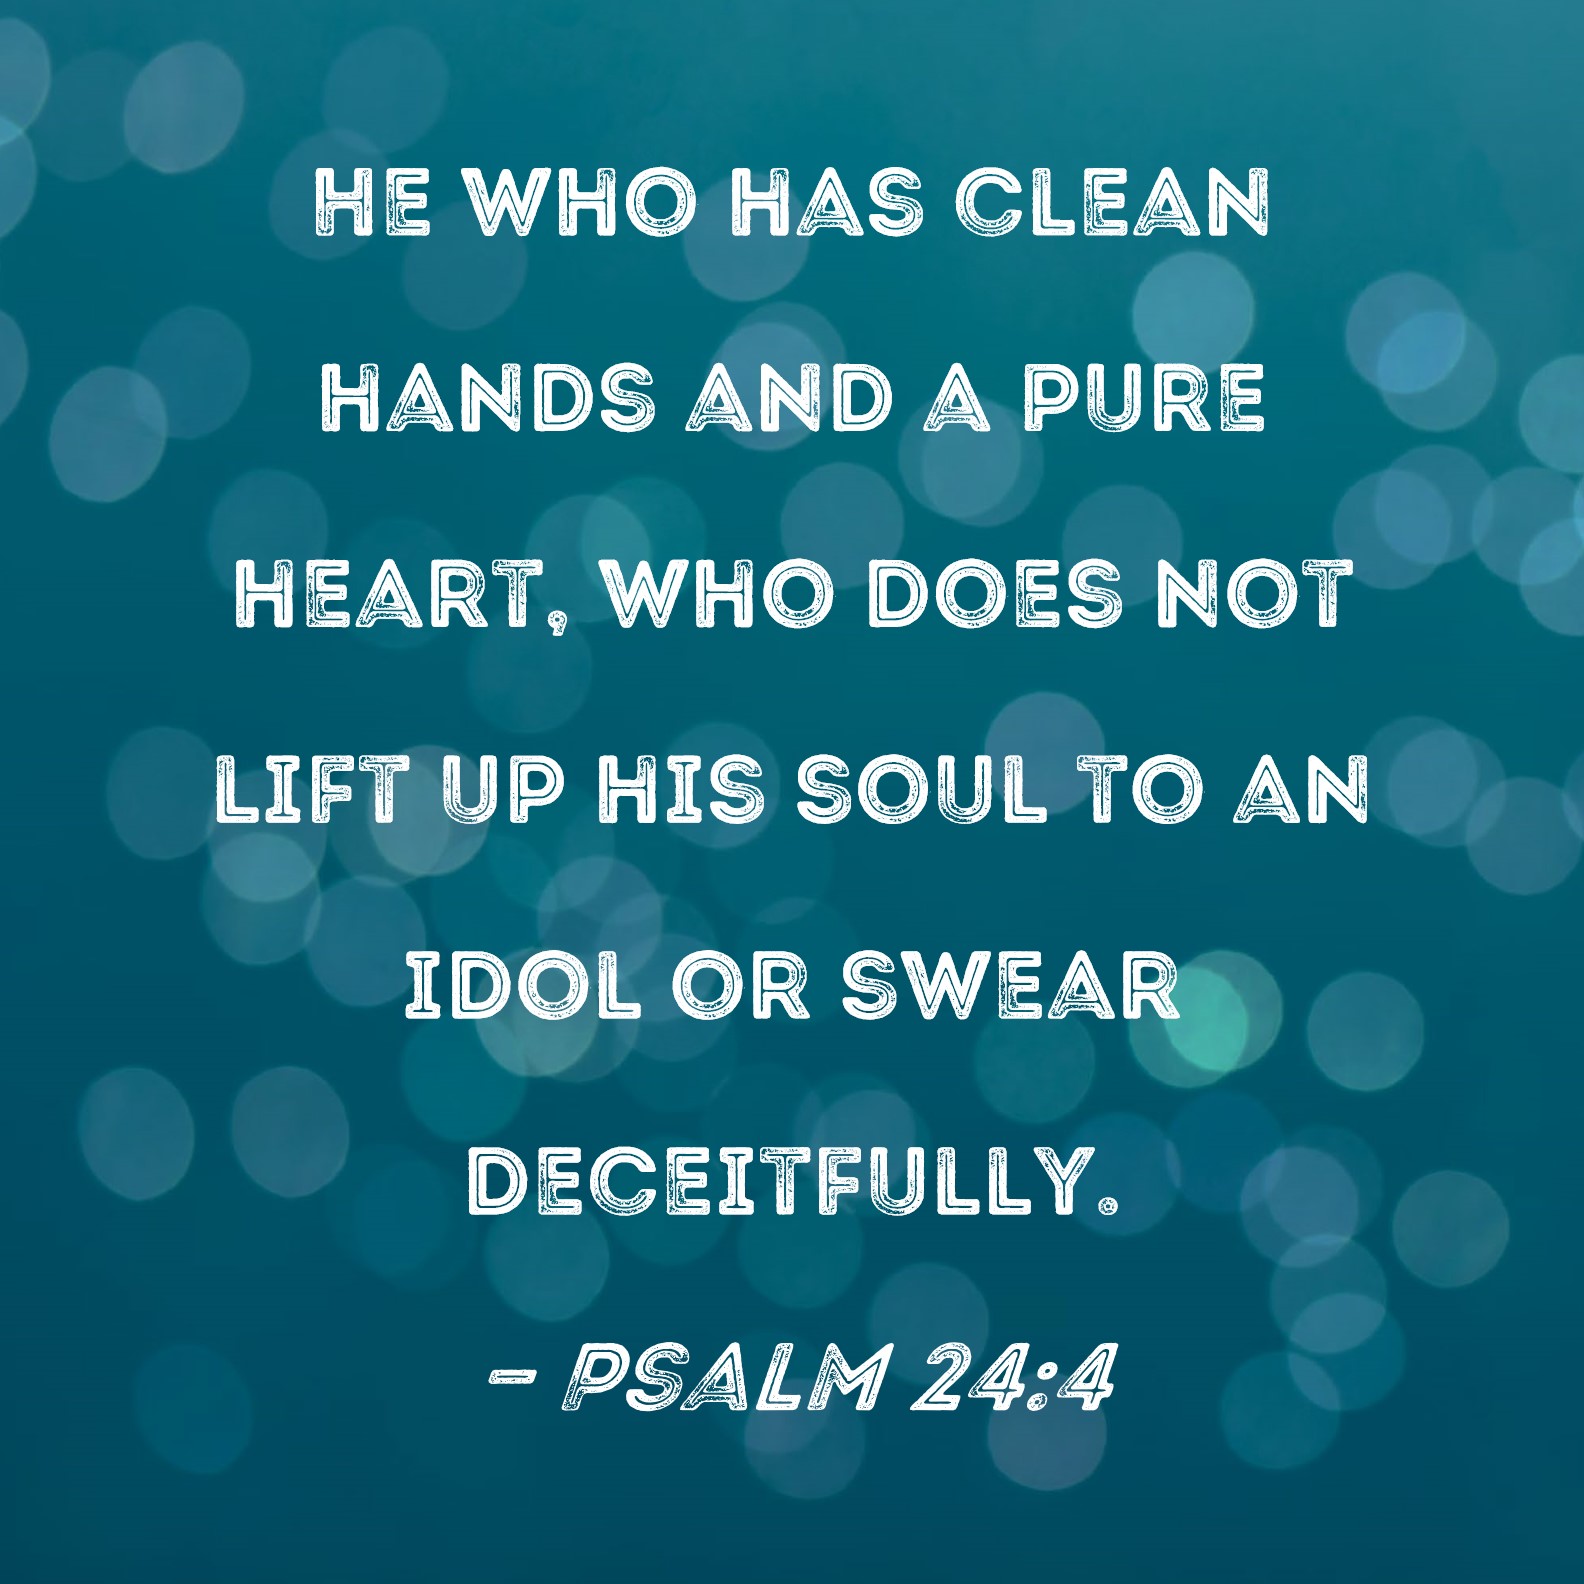 clean hands and a pure heart